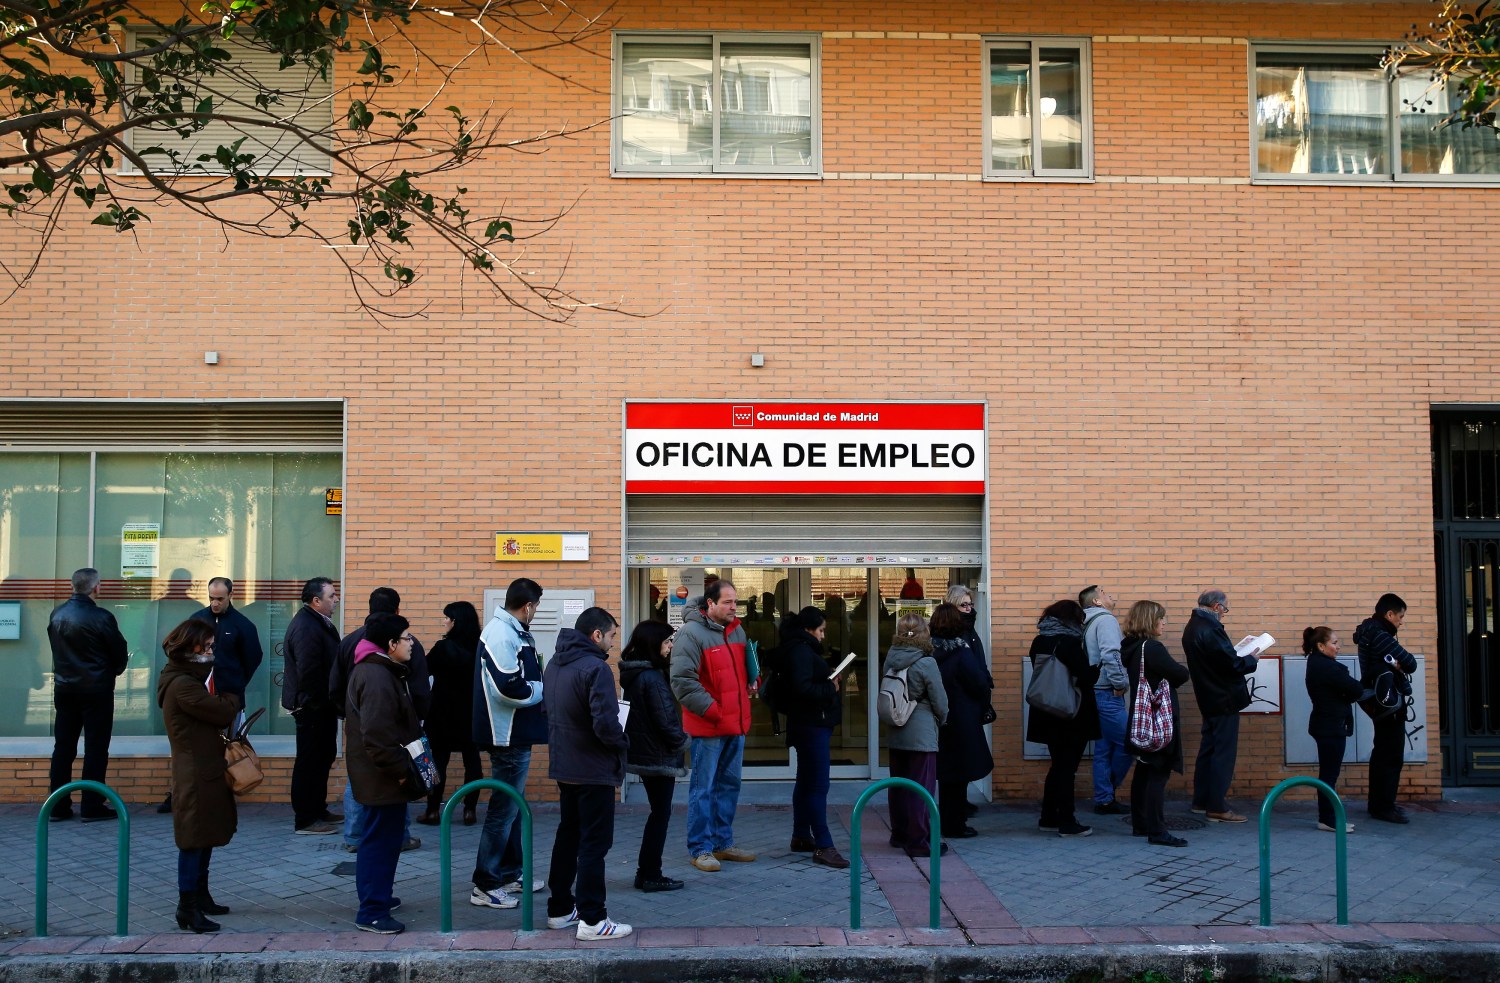 People wait in line in front of a government-run employment office in Madrid March 4, 2014. The number of registered jobless in Spain fell by 0.04 percent in February from a month earlier, or by 1,949 people, leaving 4.8 million people out of work, data from the Labour Ministry showed on Tuesday. It was the first time that the jobless figure fell in the month of February since the start of Spain's financial crisis in 2007. REUTERS/Andrea Comas (SPAIN - Tags: POLITICS BUSINESS EMPLOYMENT TPX IMAGES OF THE DAY) - GM1EA341GNO01